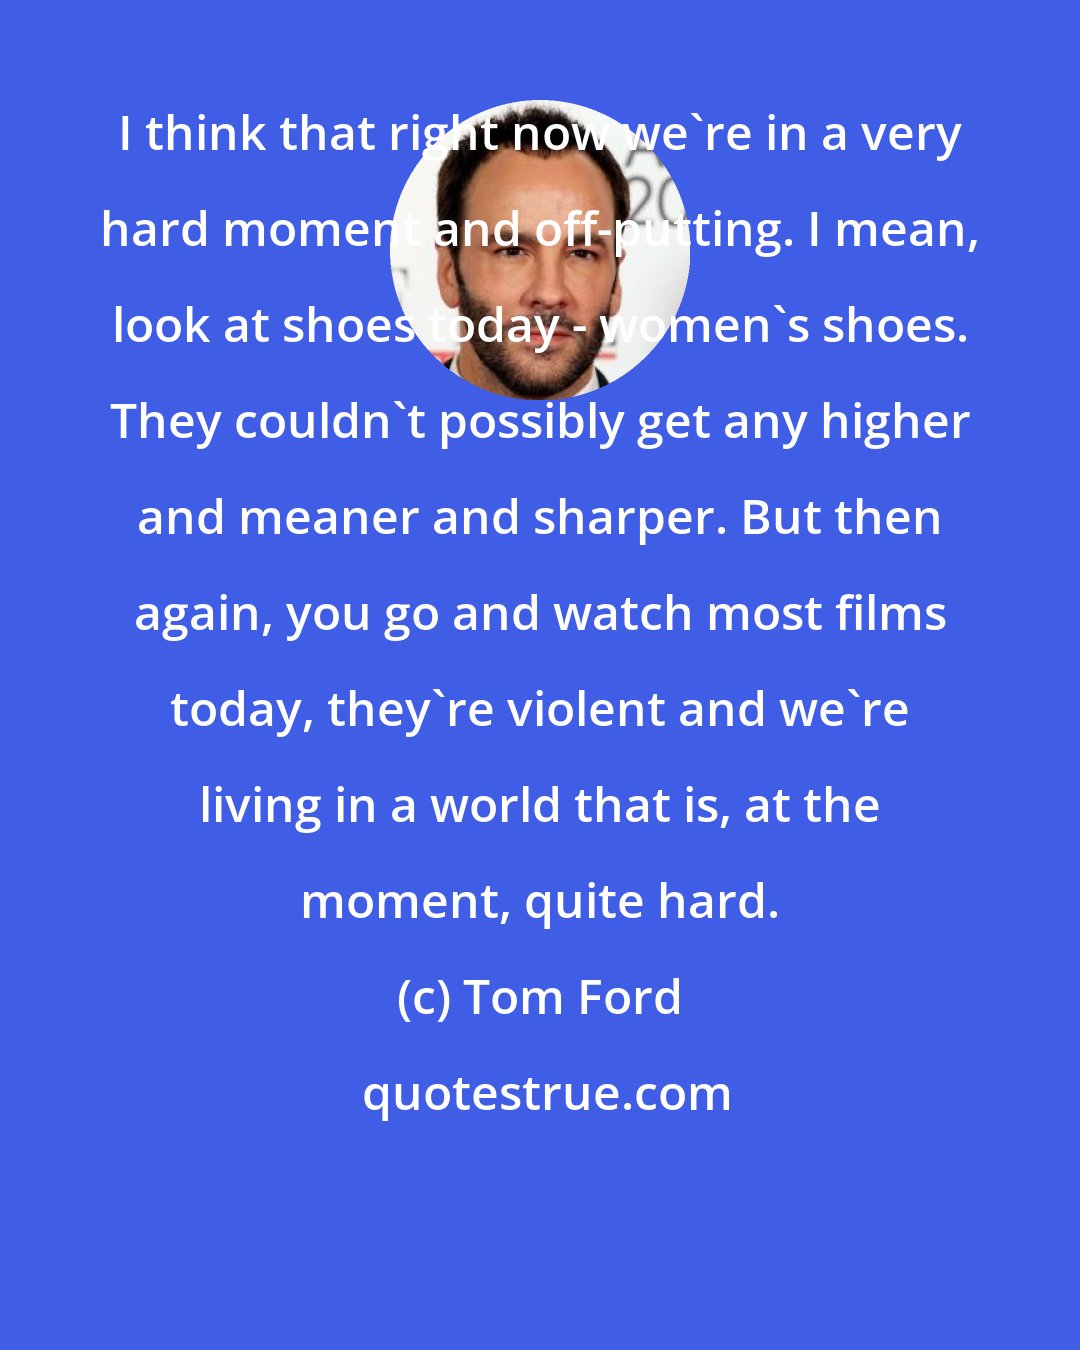 Tom Ford: I think that right now we're in a very hard moment and off-putting. I mean, look at shoes today - women's shoes. They couldn't possibly get any higher and meaner and sharper. But then again, you go and watch most films today, they're violent and we're living in a world that is, at the moment, quite hard.